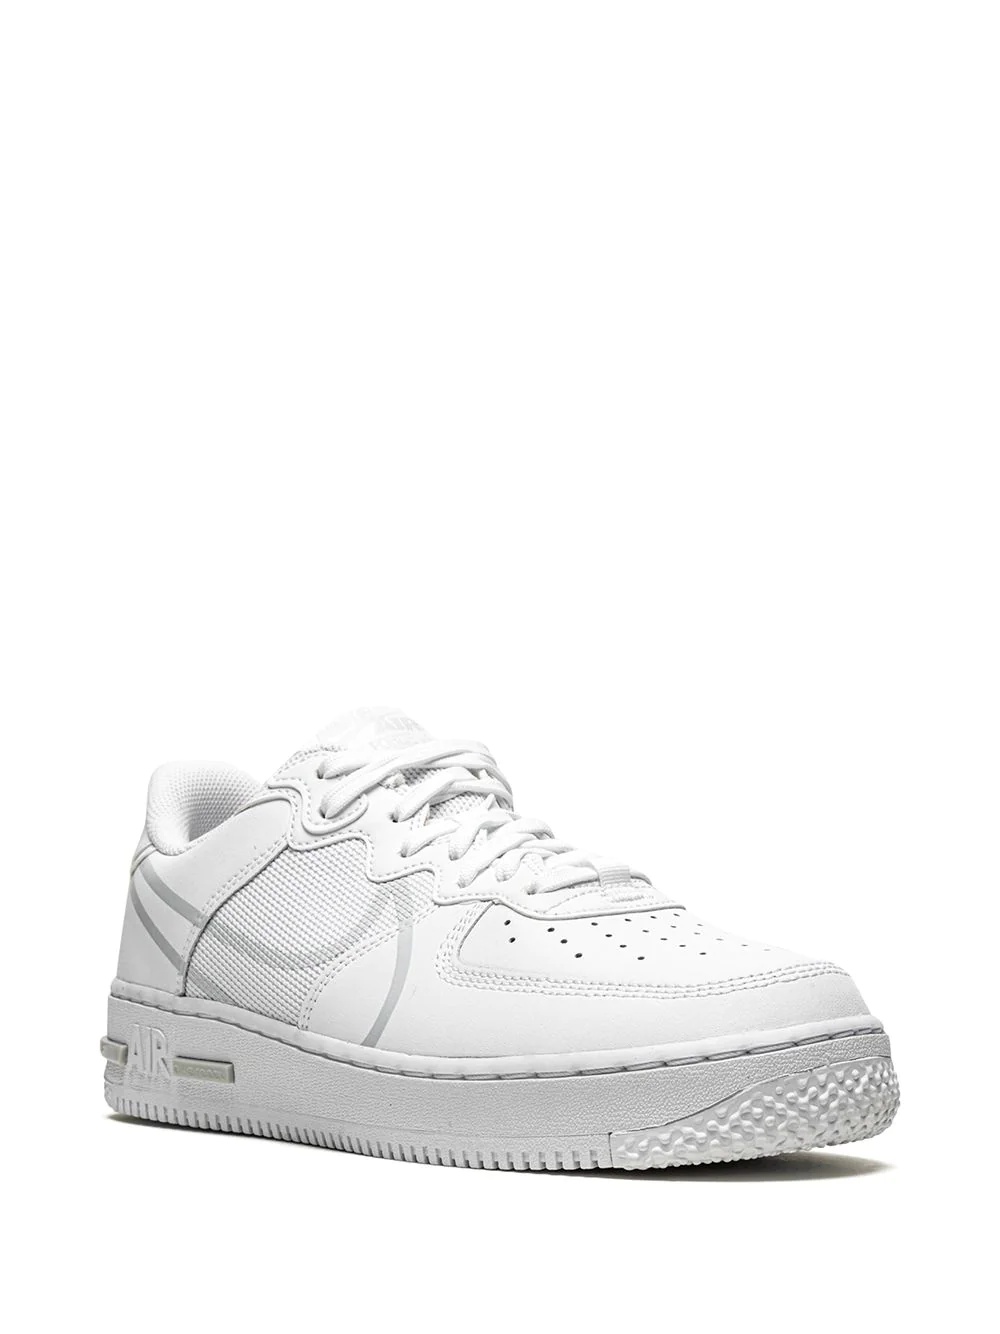 Air Force 1 Low React "White" sneakers - 2